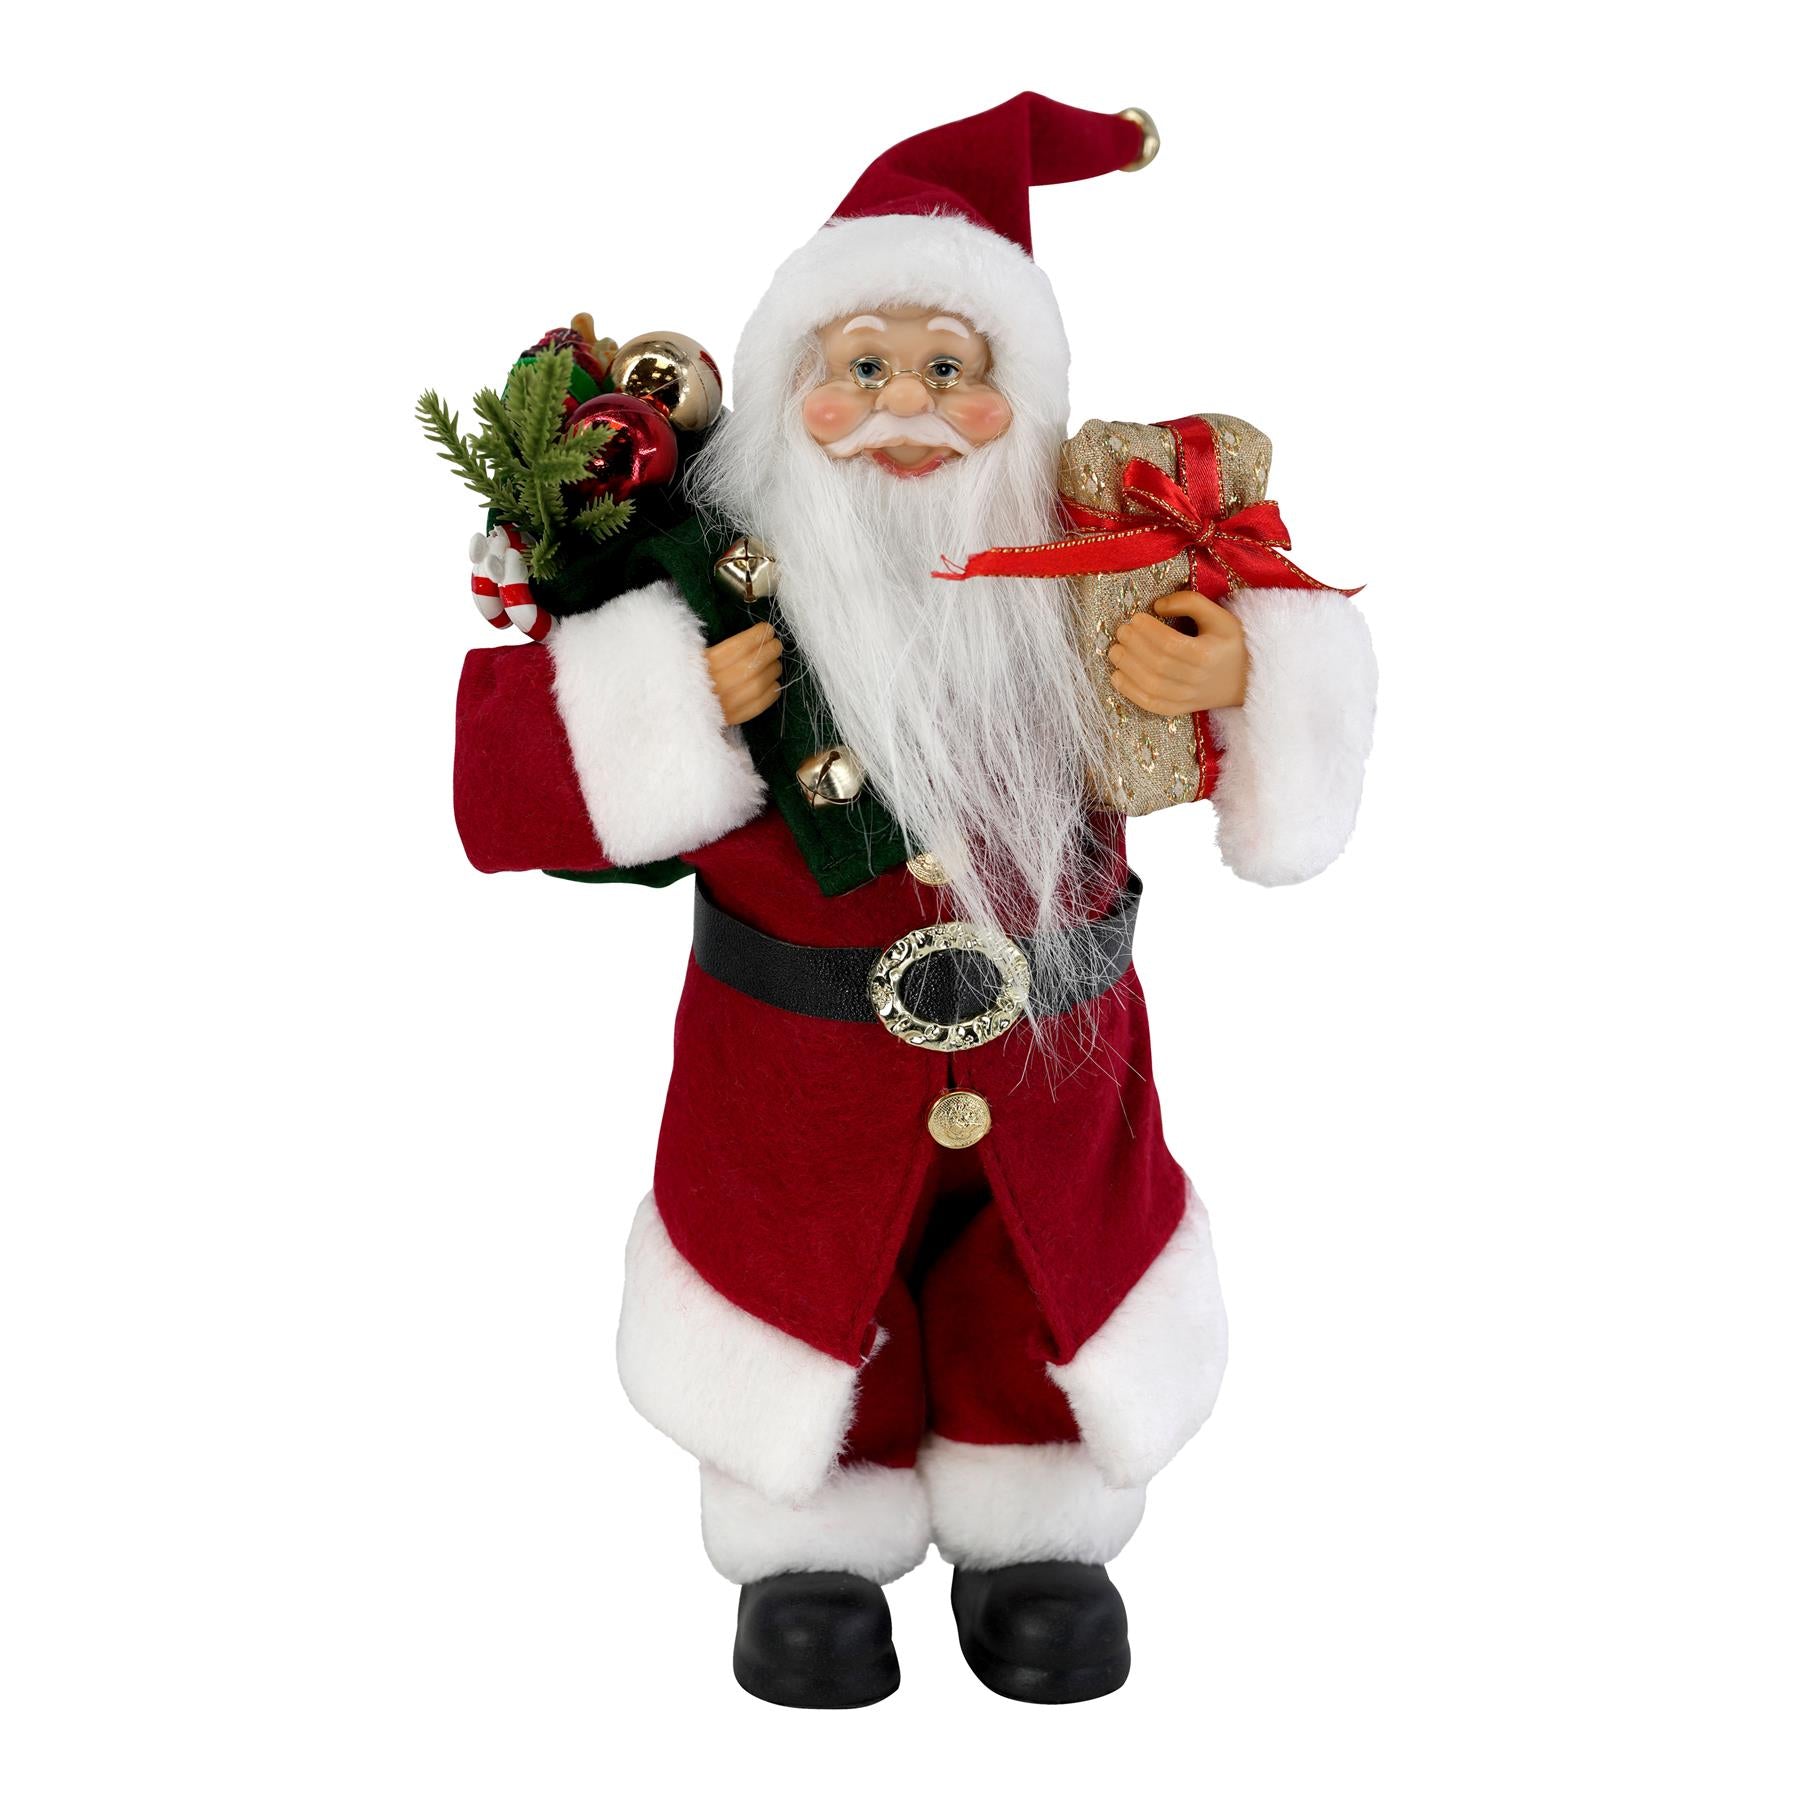 Standing Santa Claus Figure by The Magic Toy Shop - UKBuyZone